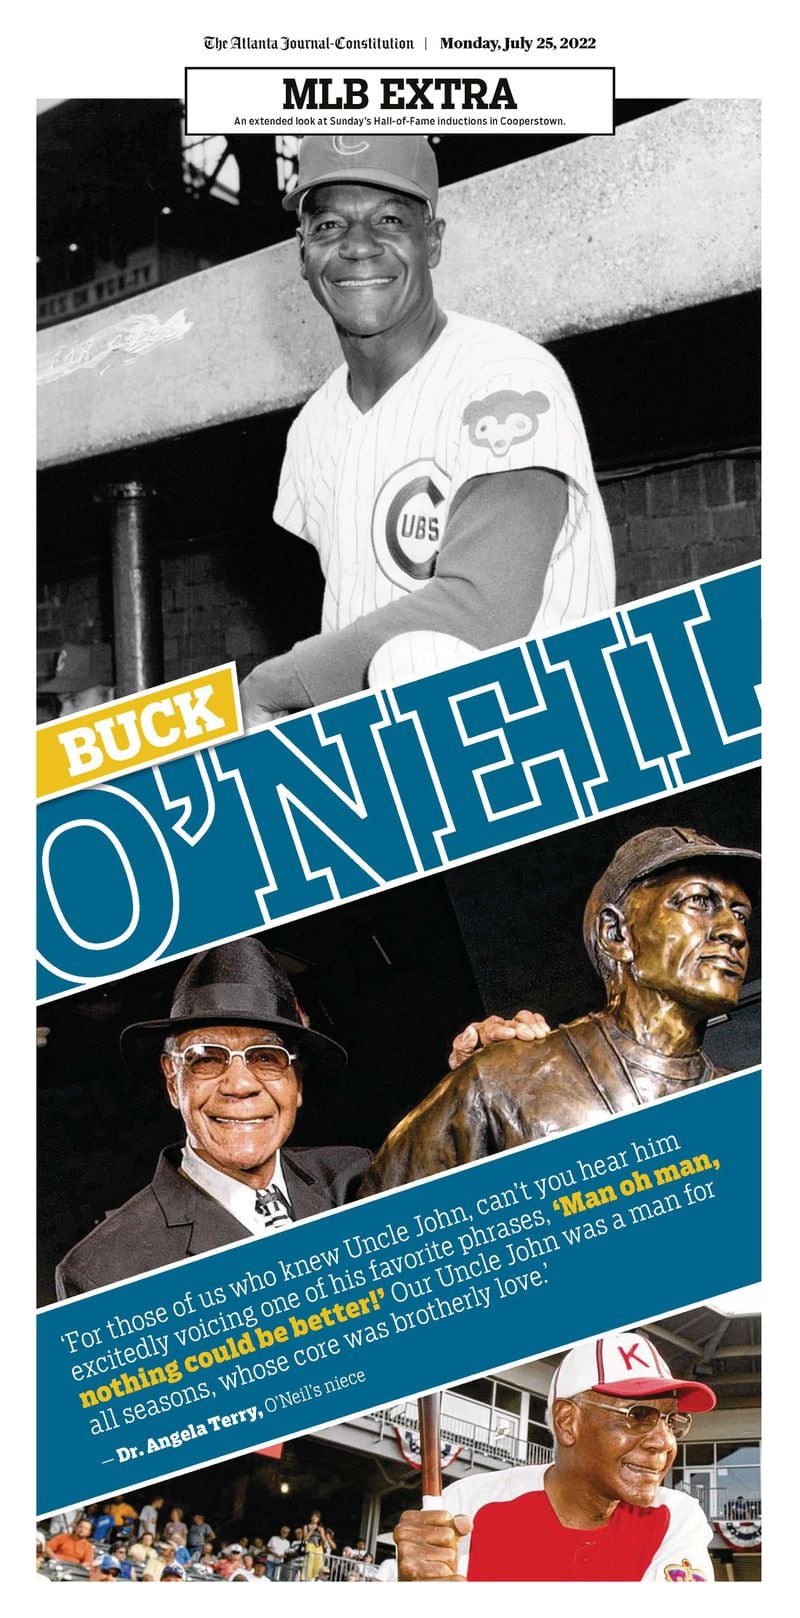 Buck O'Neil page as part of expanded coverage of the Baseball Hall of Fame ceremony in Monday’s ePaper